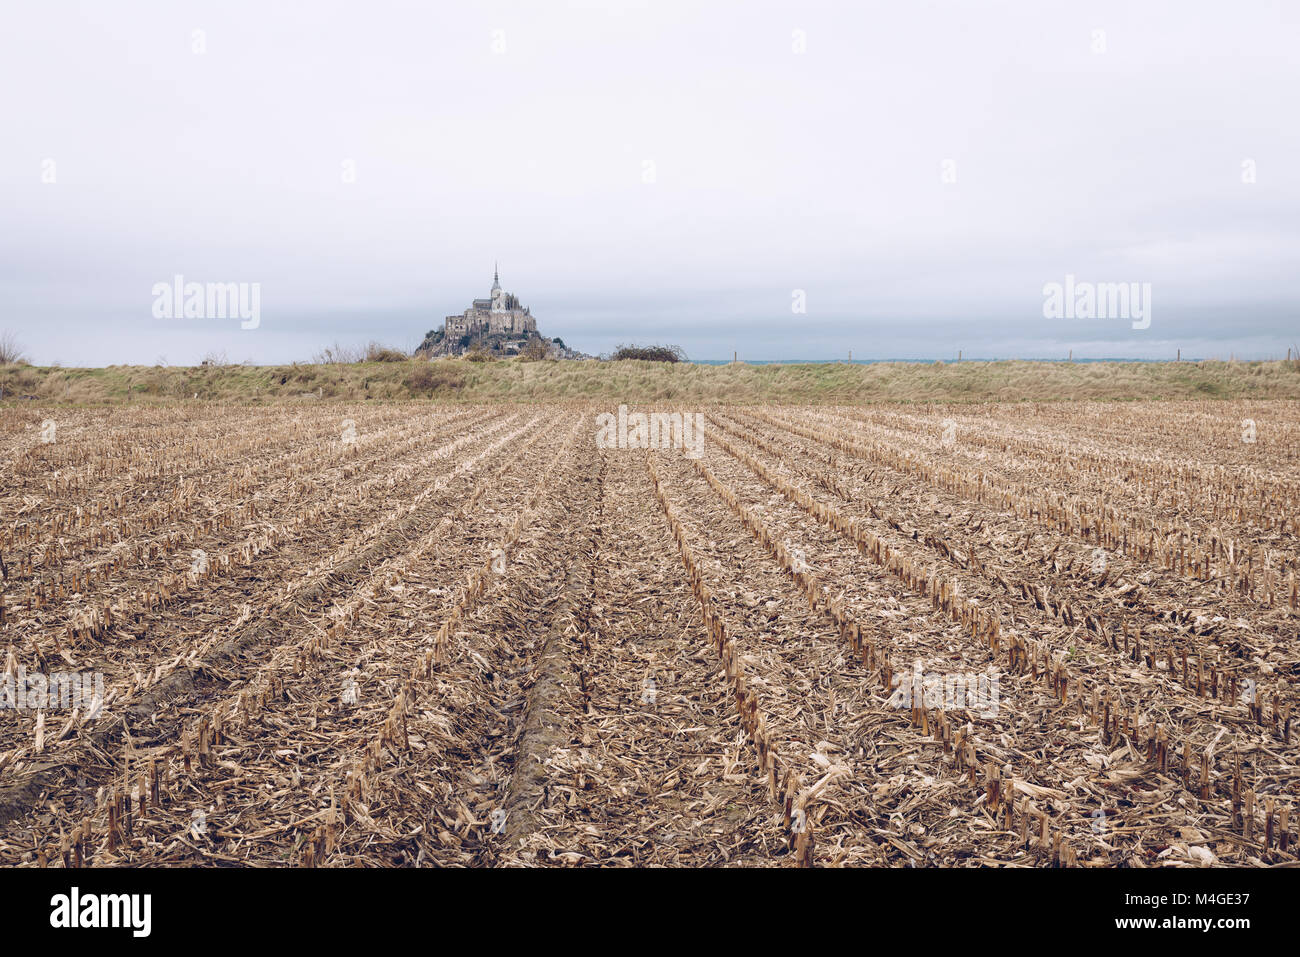 Cut corn field and Mont Saint Michel in the distance, Normandy, France Stock Photo